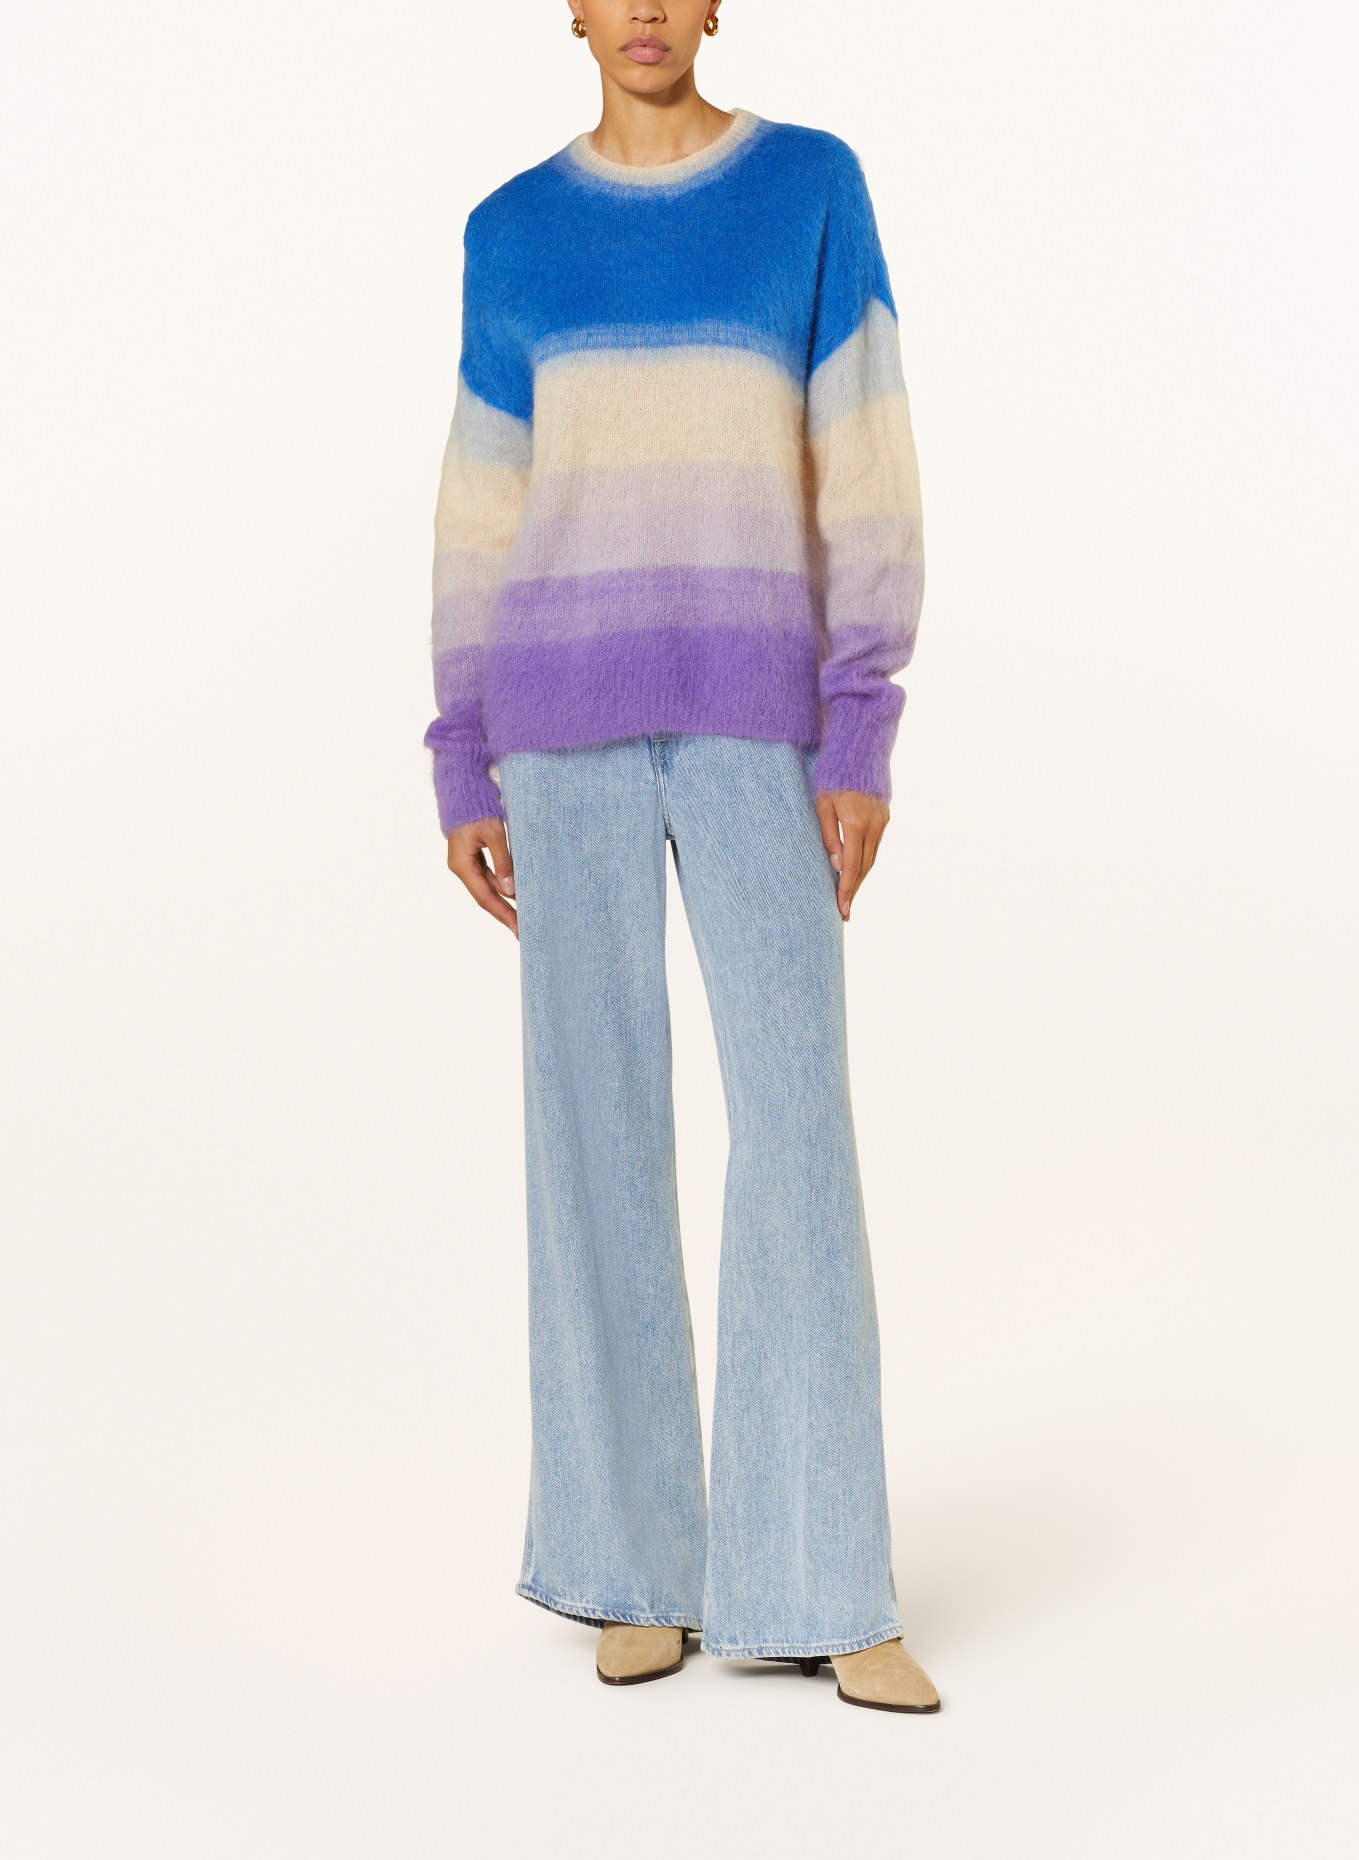 MARANT ÉTOILE Sweater DRUSSELL with mohair, Color: BLUE/ WHITE/ PURPLE (Image 2)